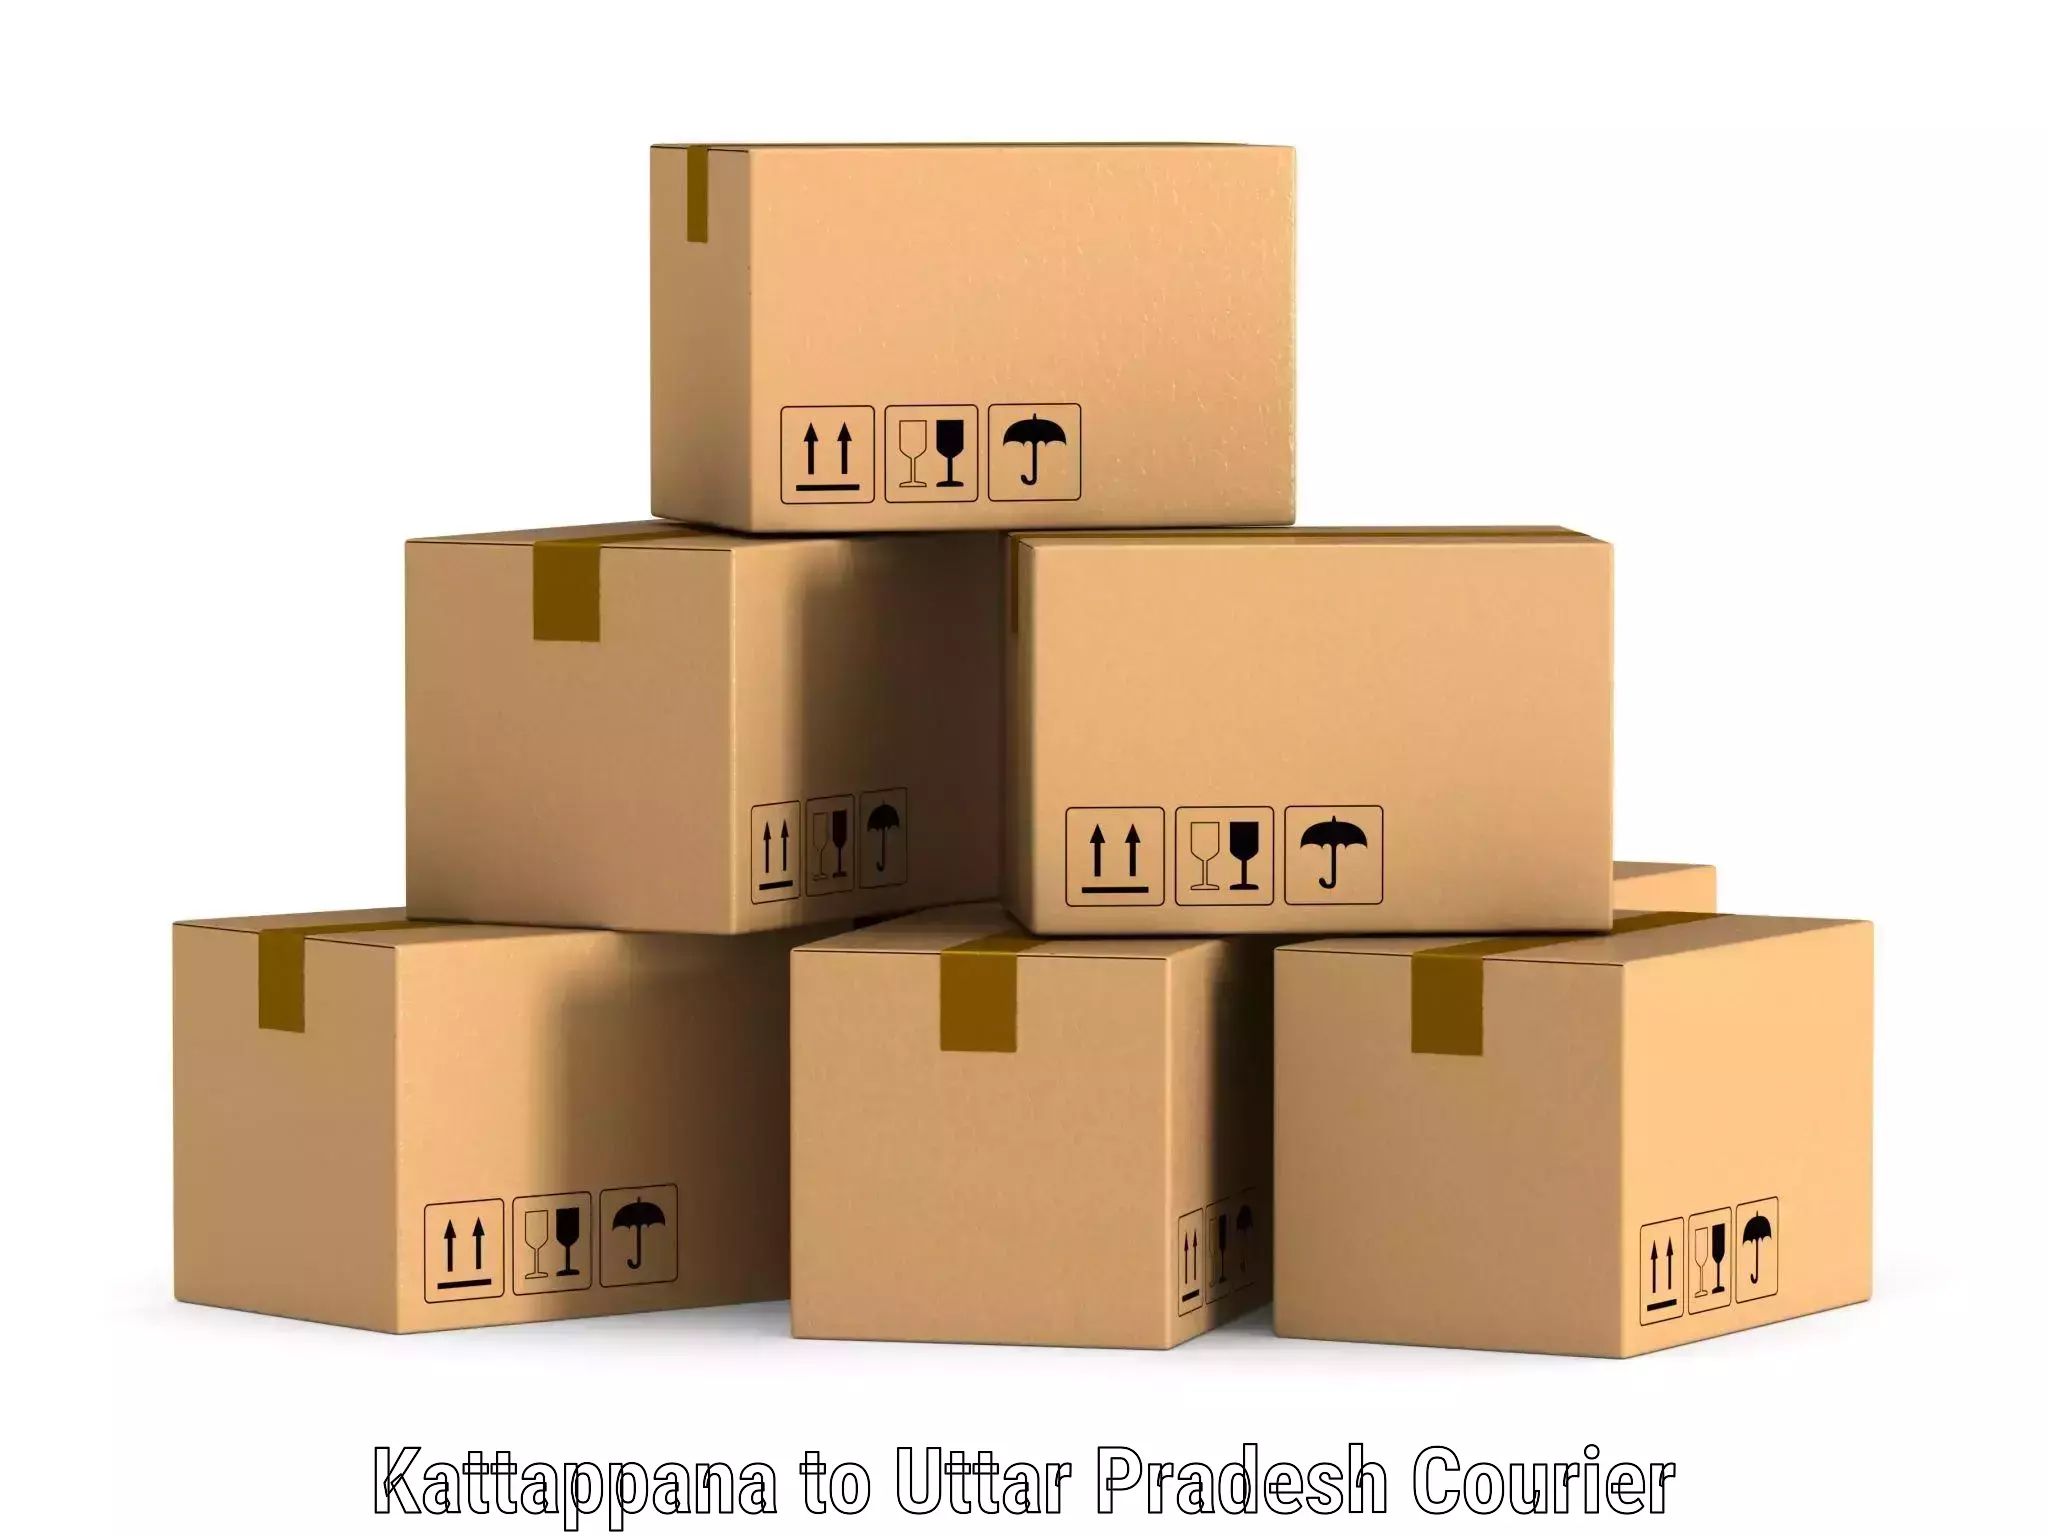 Nationwide courier service Kattappana to IIIT Lucknow